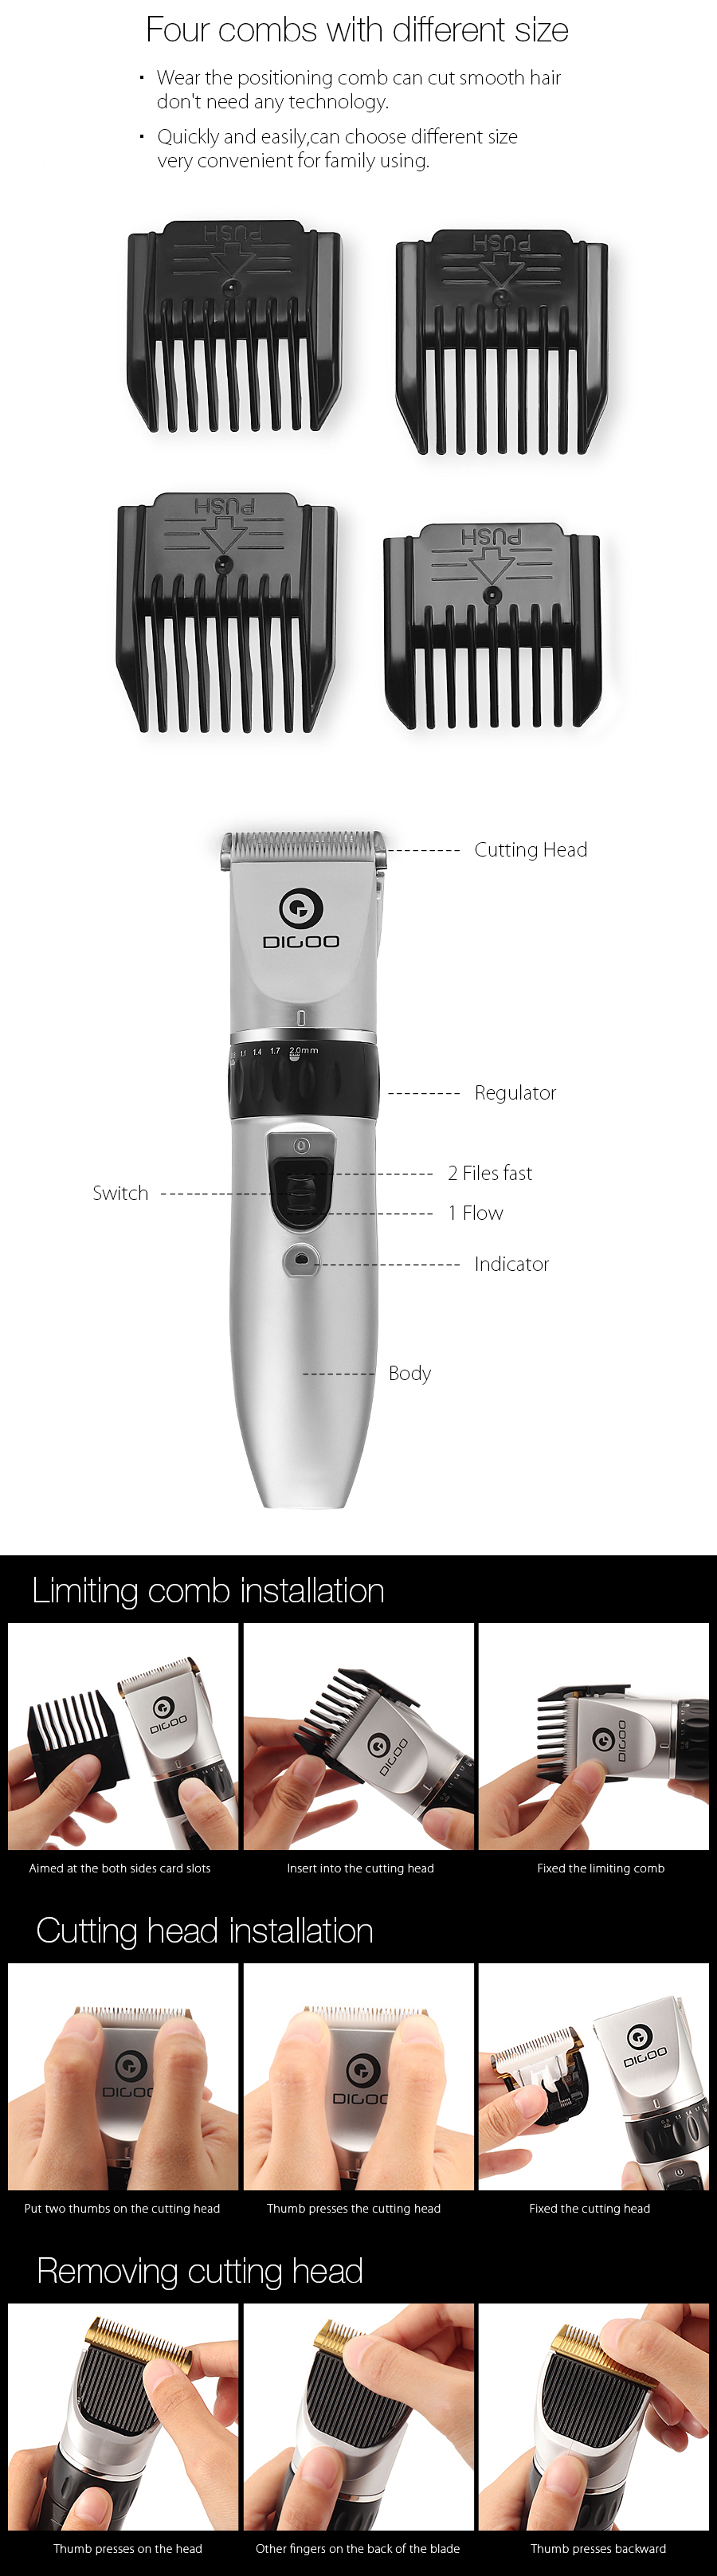 Digoo-BB-T1-USB-Ceramic-R-Blade-Hair-Trimmer-Rechargeable-Hair-Clipper-4X-Extra-Limiting-Comb-Silent-1094718